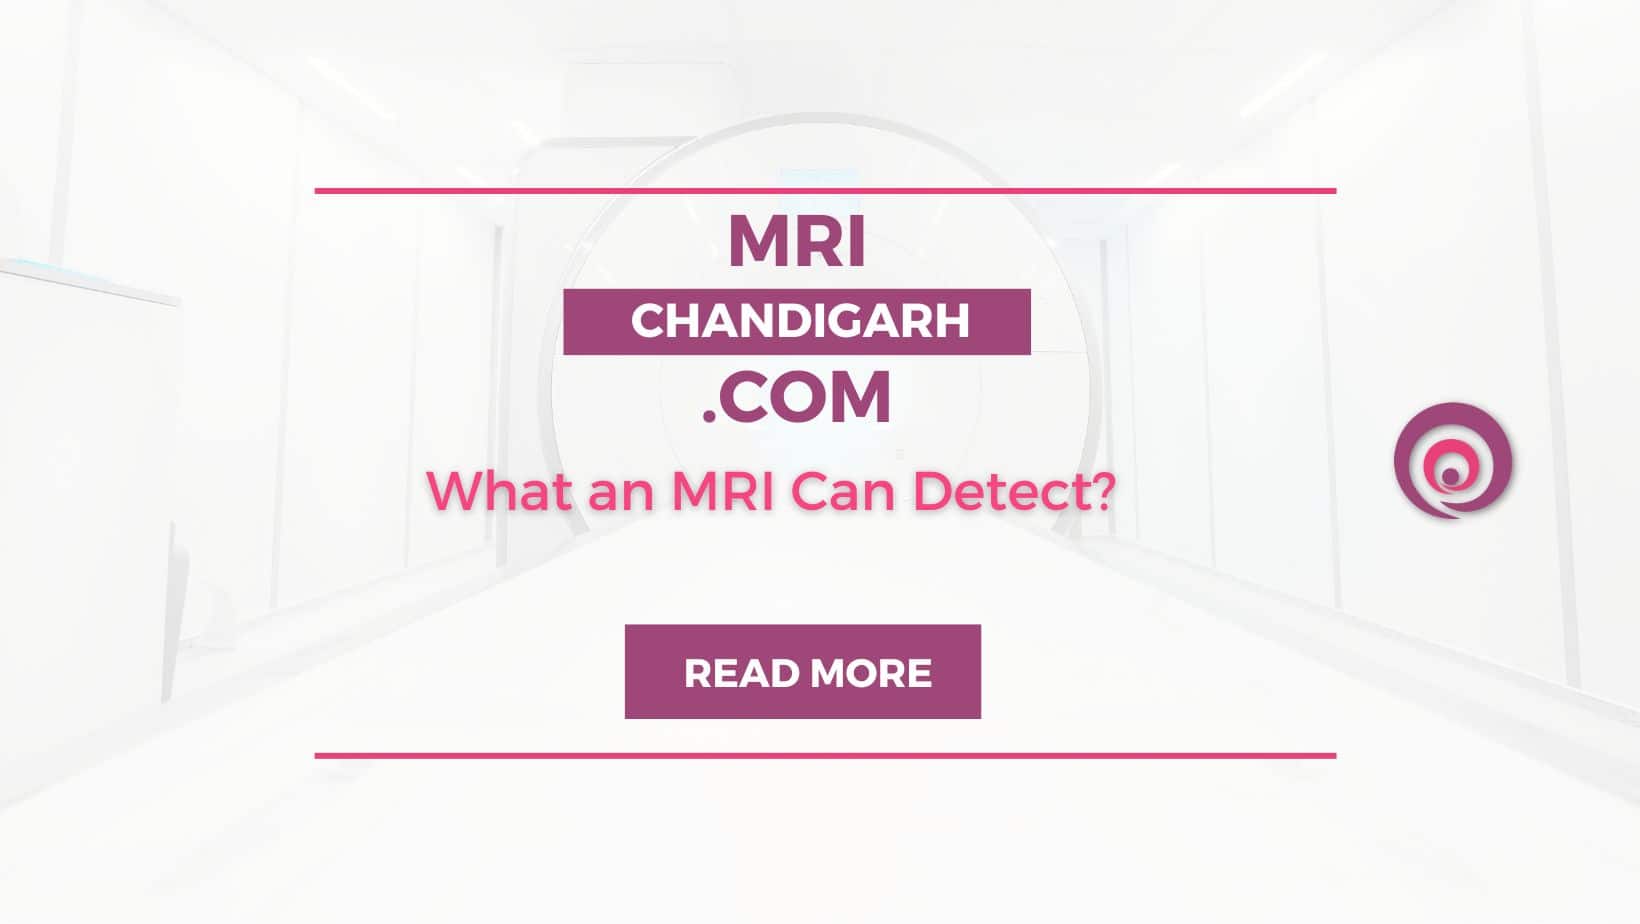 What can MRI scans detect?